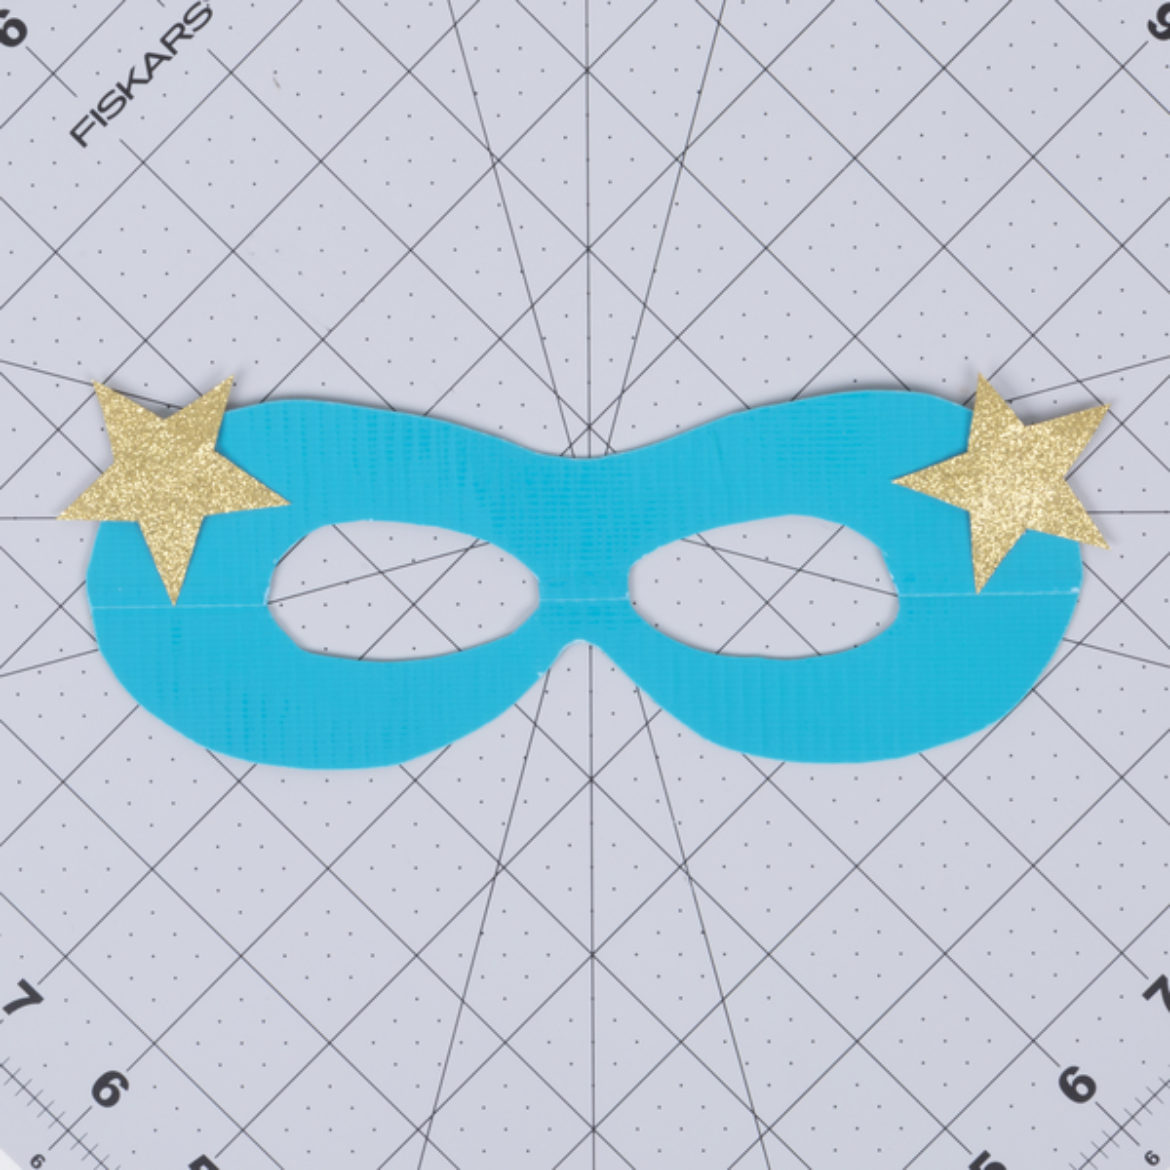 stars made in the previous step attached to the corners of the mask